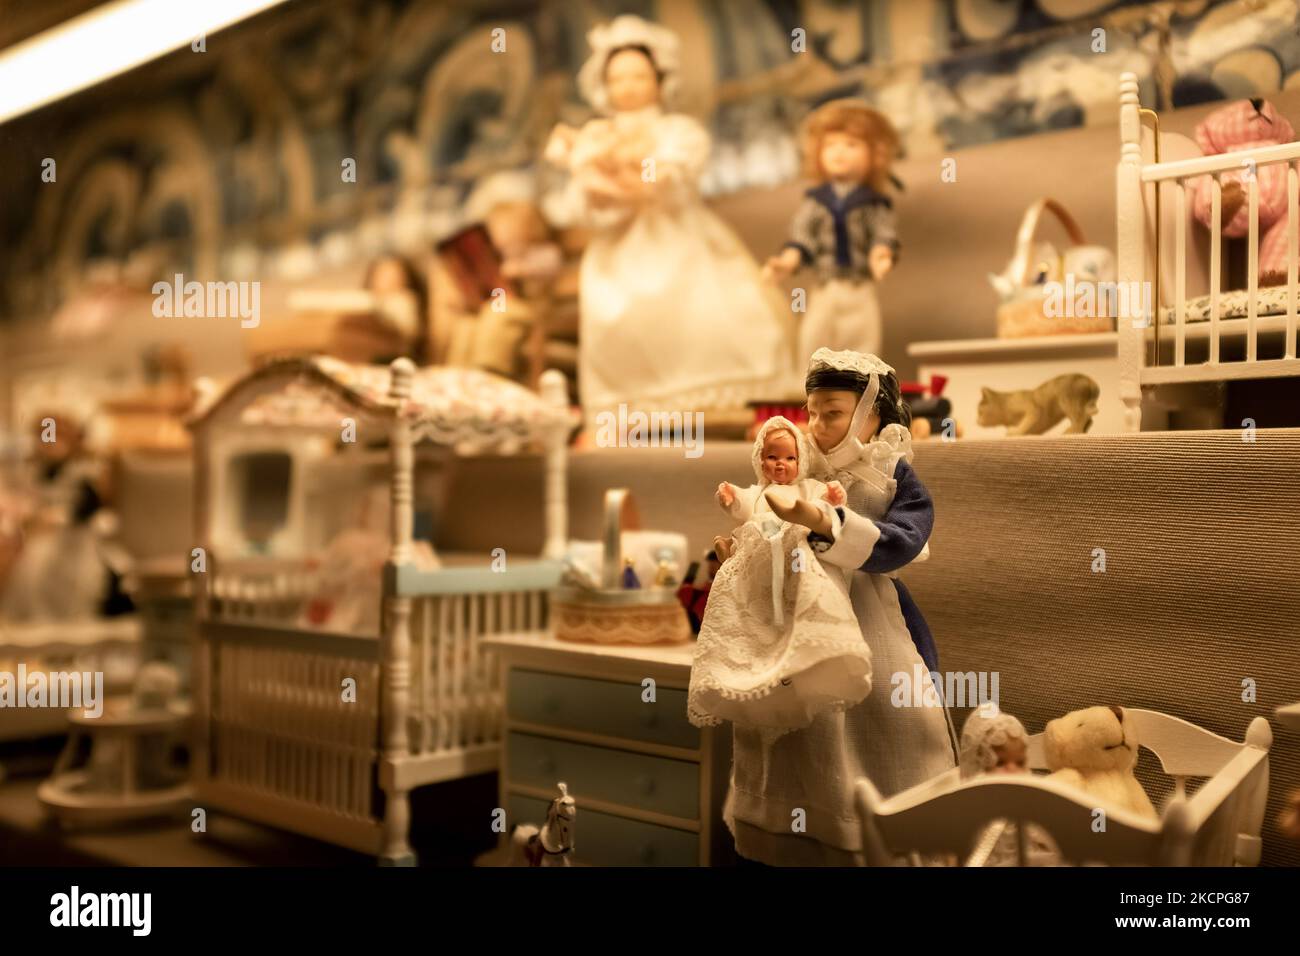 Dolls are seen at the museum area of the 'Hospital de Bonecas' in Lisbon, Portugal on October 12, 2021. Started in 1830 by Dona Carlota, an old lady making rag dolls in her small dried herbs store, at the 'Hospital de Bonecas' all sorts of dolls are being fixed and restored by specialists. The premises also host a museum, that is one of many attractions Lisbon offers to visitors. (Photo by Nikolas Kokovlis/NurPhoto) Stock Photo